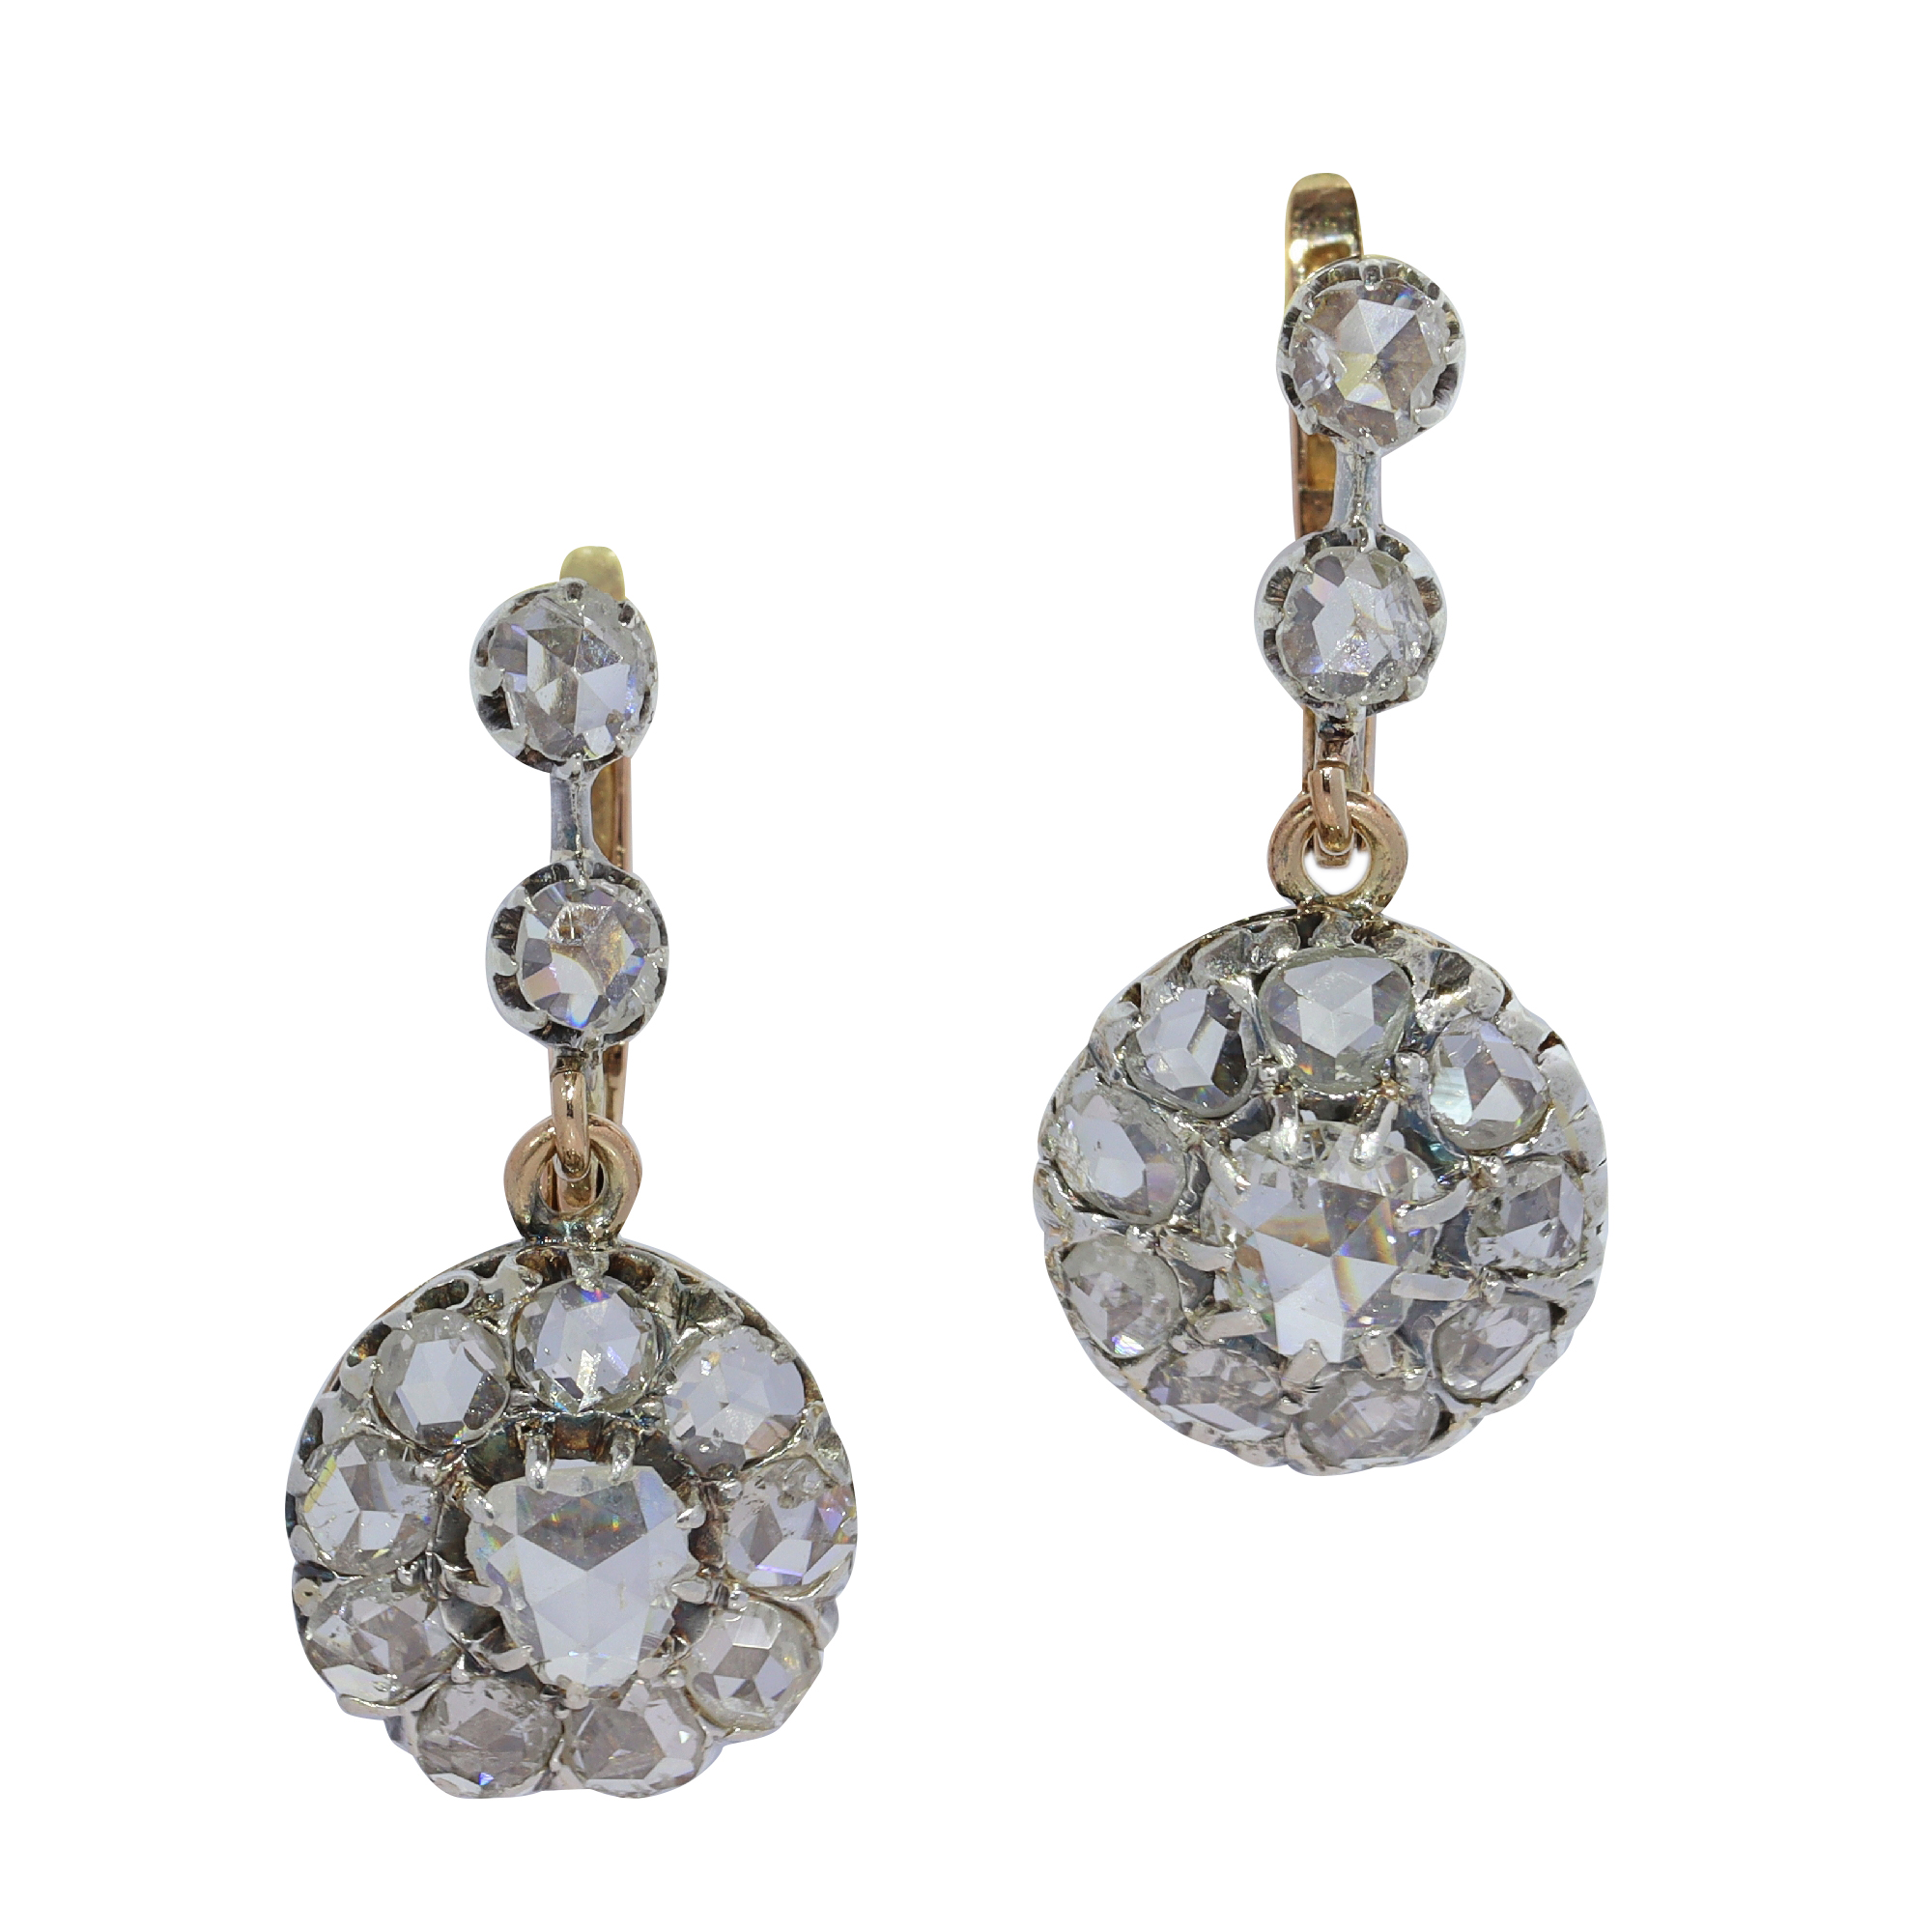 Vintage Victorian Earrings with Delicate Rose-Cut Diamonds